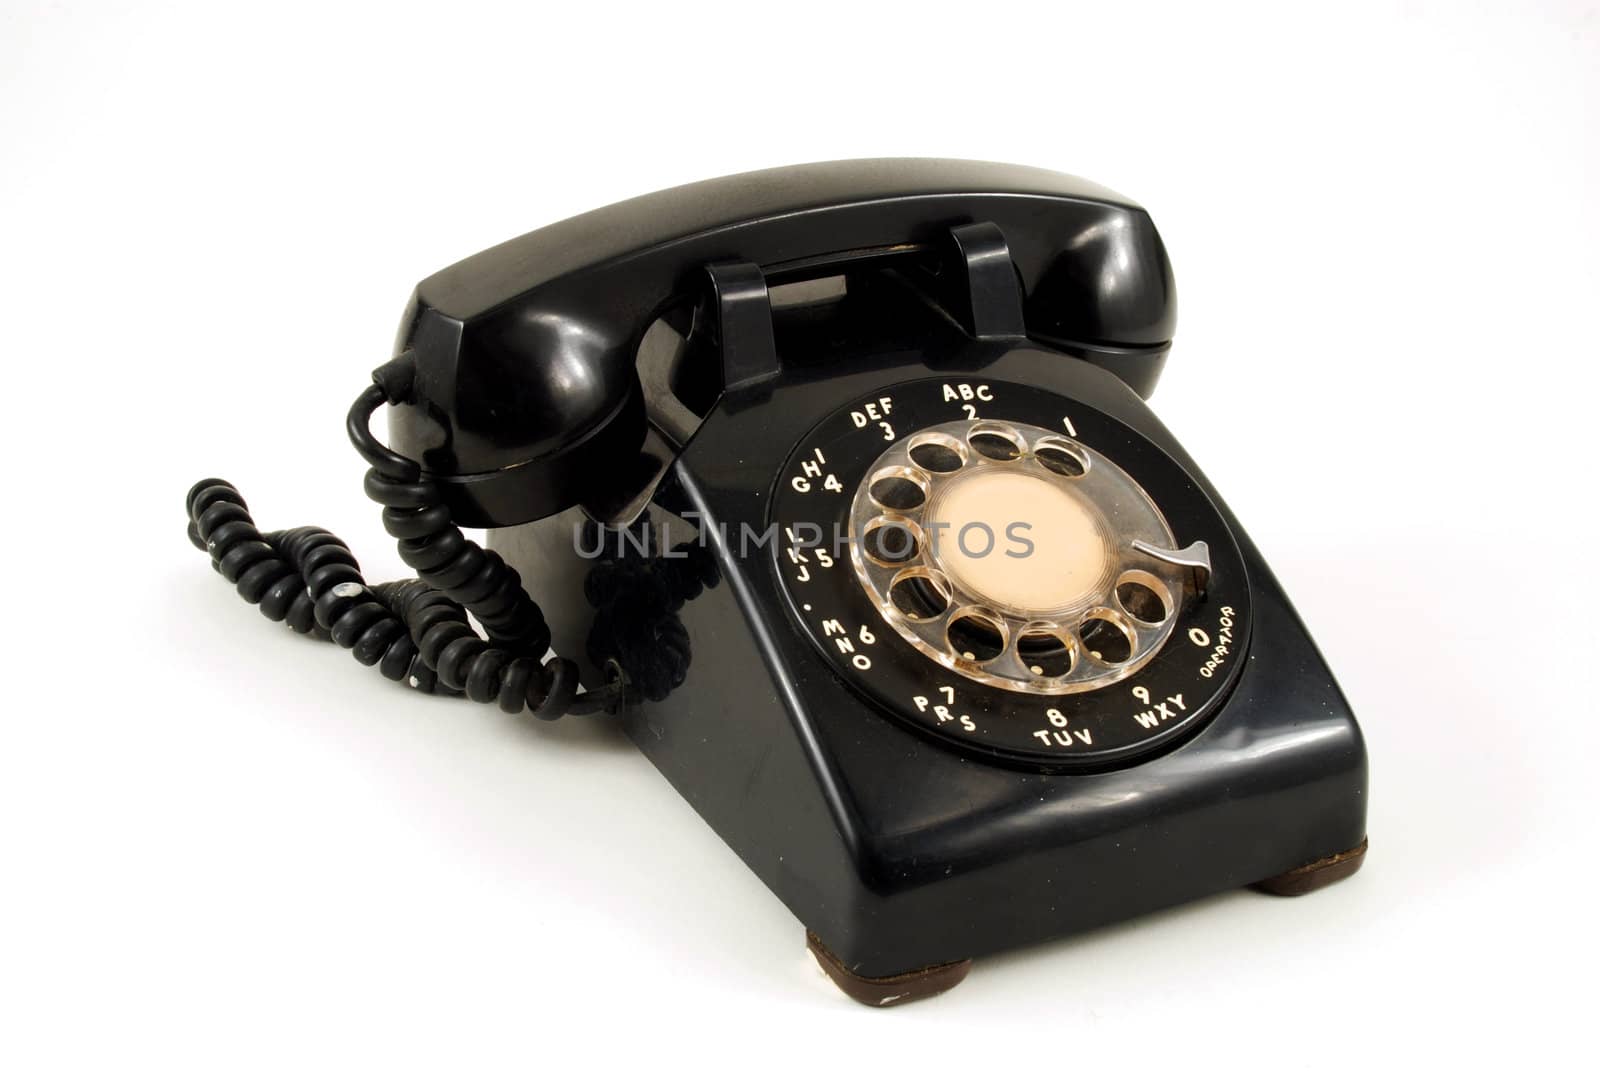 Pictures of an older, analog type telephone